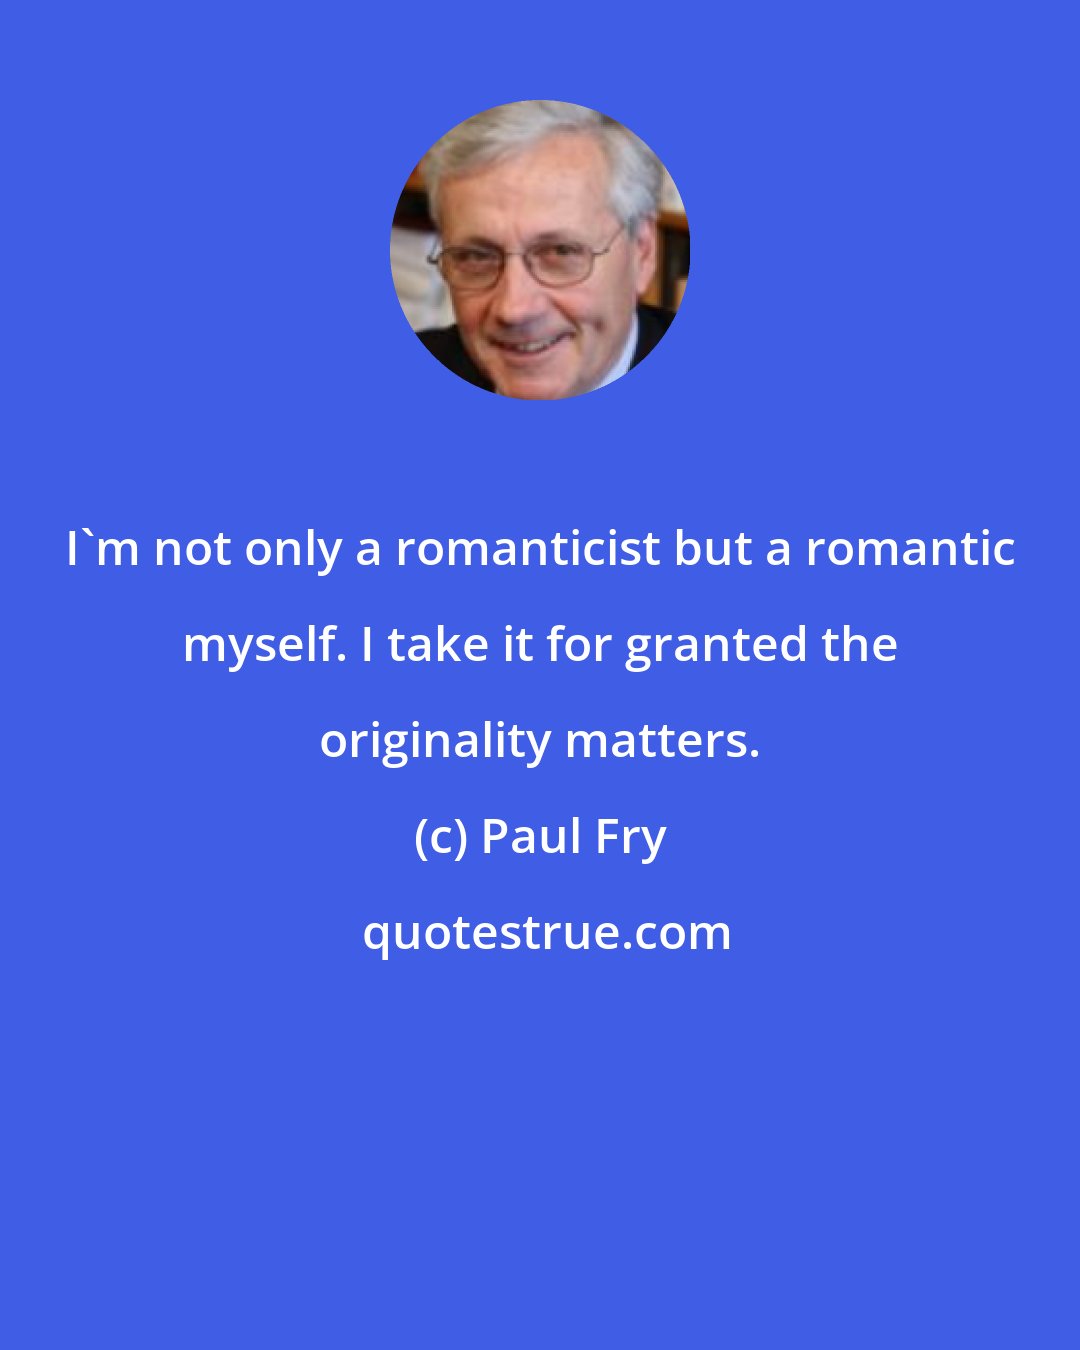 Paul Fry: I'm not only a romanticist but a romantic myself. I take it for granted the originality matters.